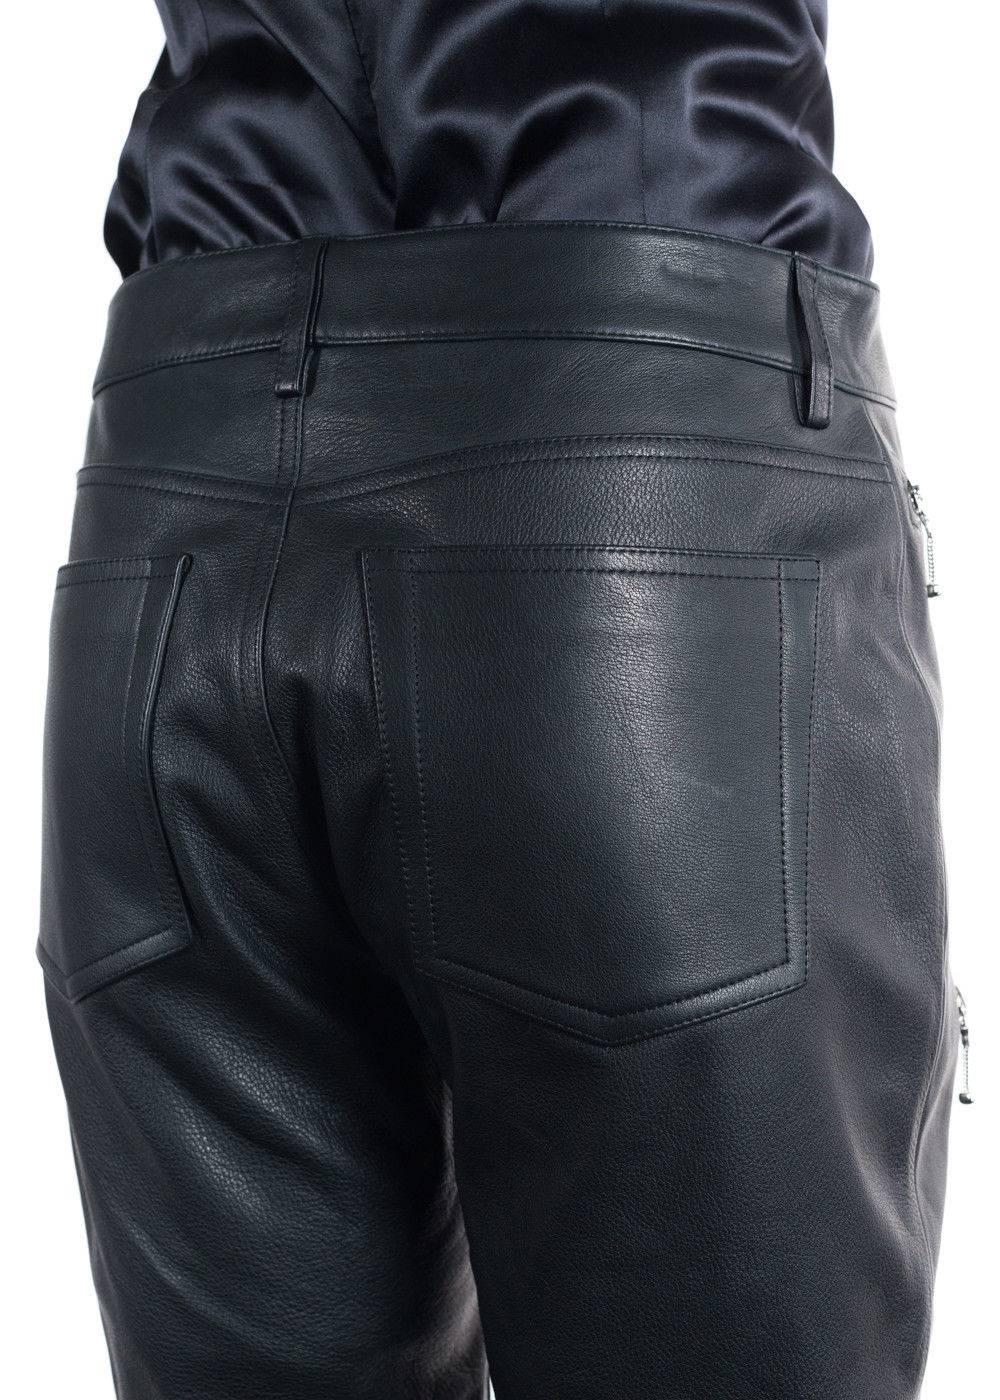 Brand New Alexander Wang Cropped Leather Biker Trousers
Original Tags 
Retails in Stores & Online for $1995
Size EUR 40 / US 4

These Alexander Wang Cropped trousers are perfect for that night out. These pants were designed in Italy using 100%